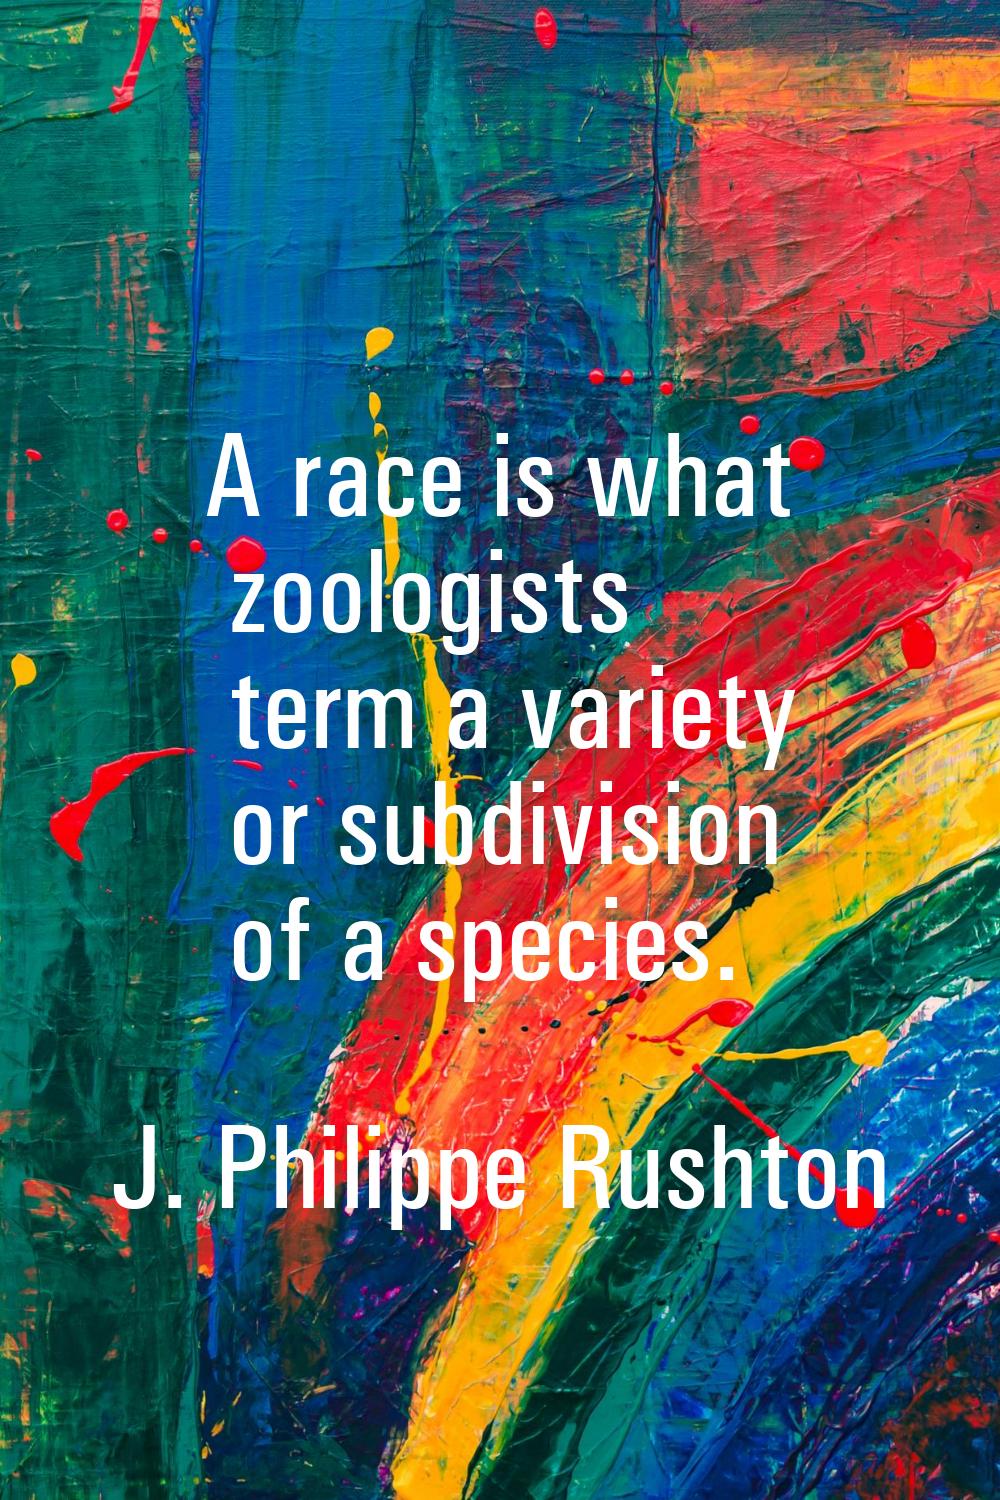 A race is what zoologists term a variety or subdivision of a species.